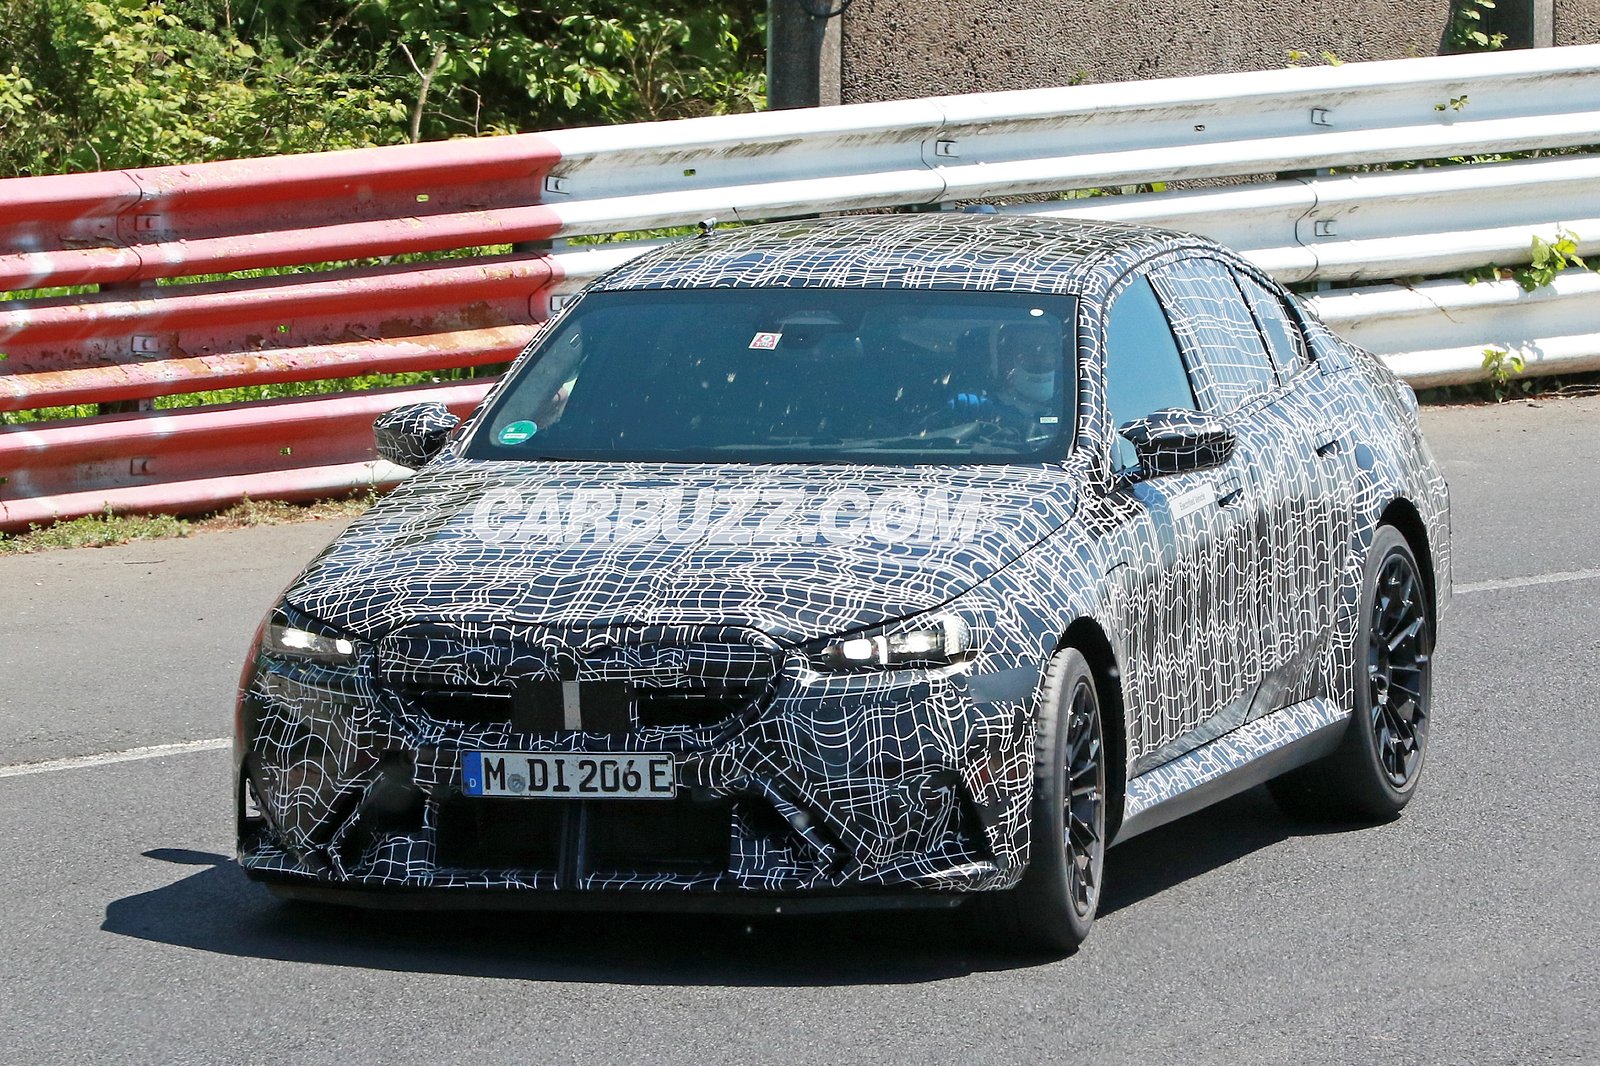 LEAKED: BMW M5 Will Arrive With 718-HP Plug-In V8 And Huge Weight Penalty